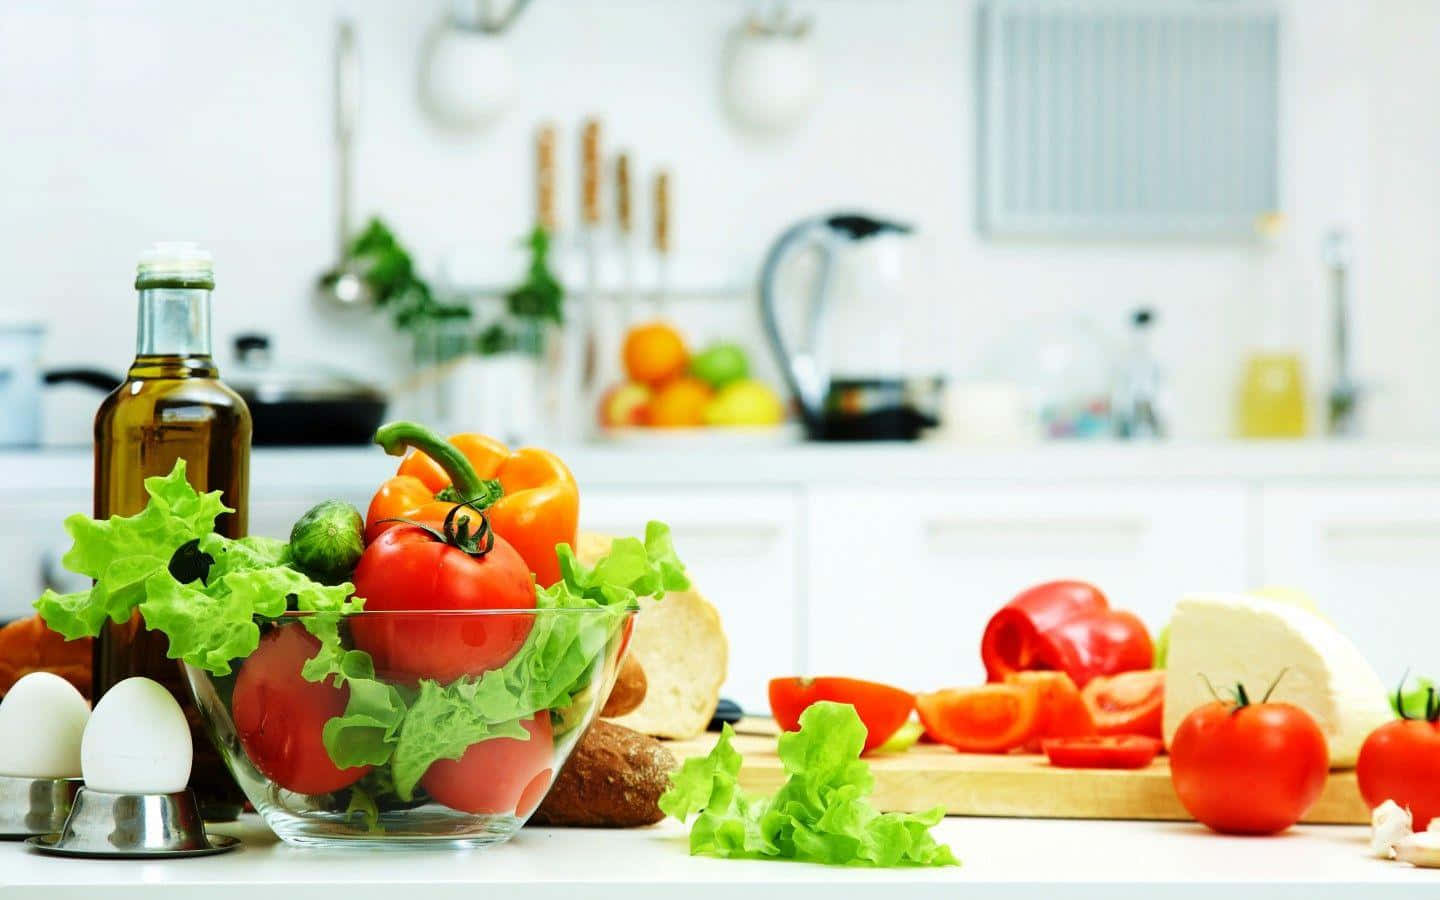 Healthy Food Vegetables In Kitchen Picture